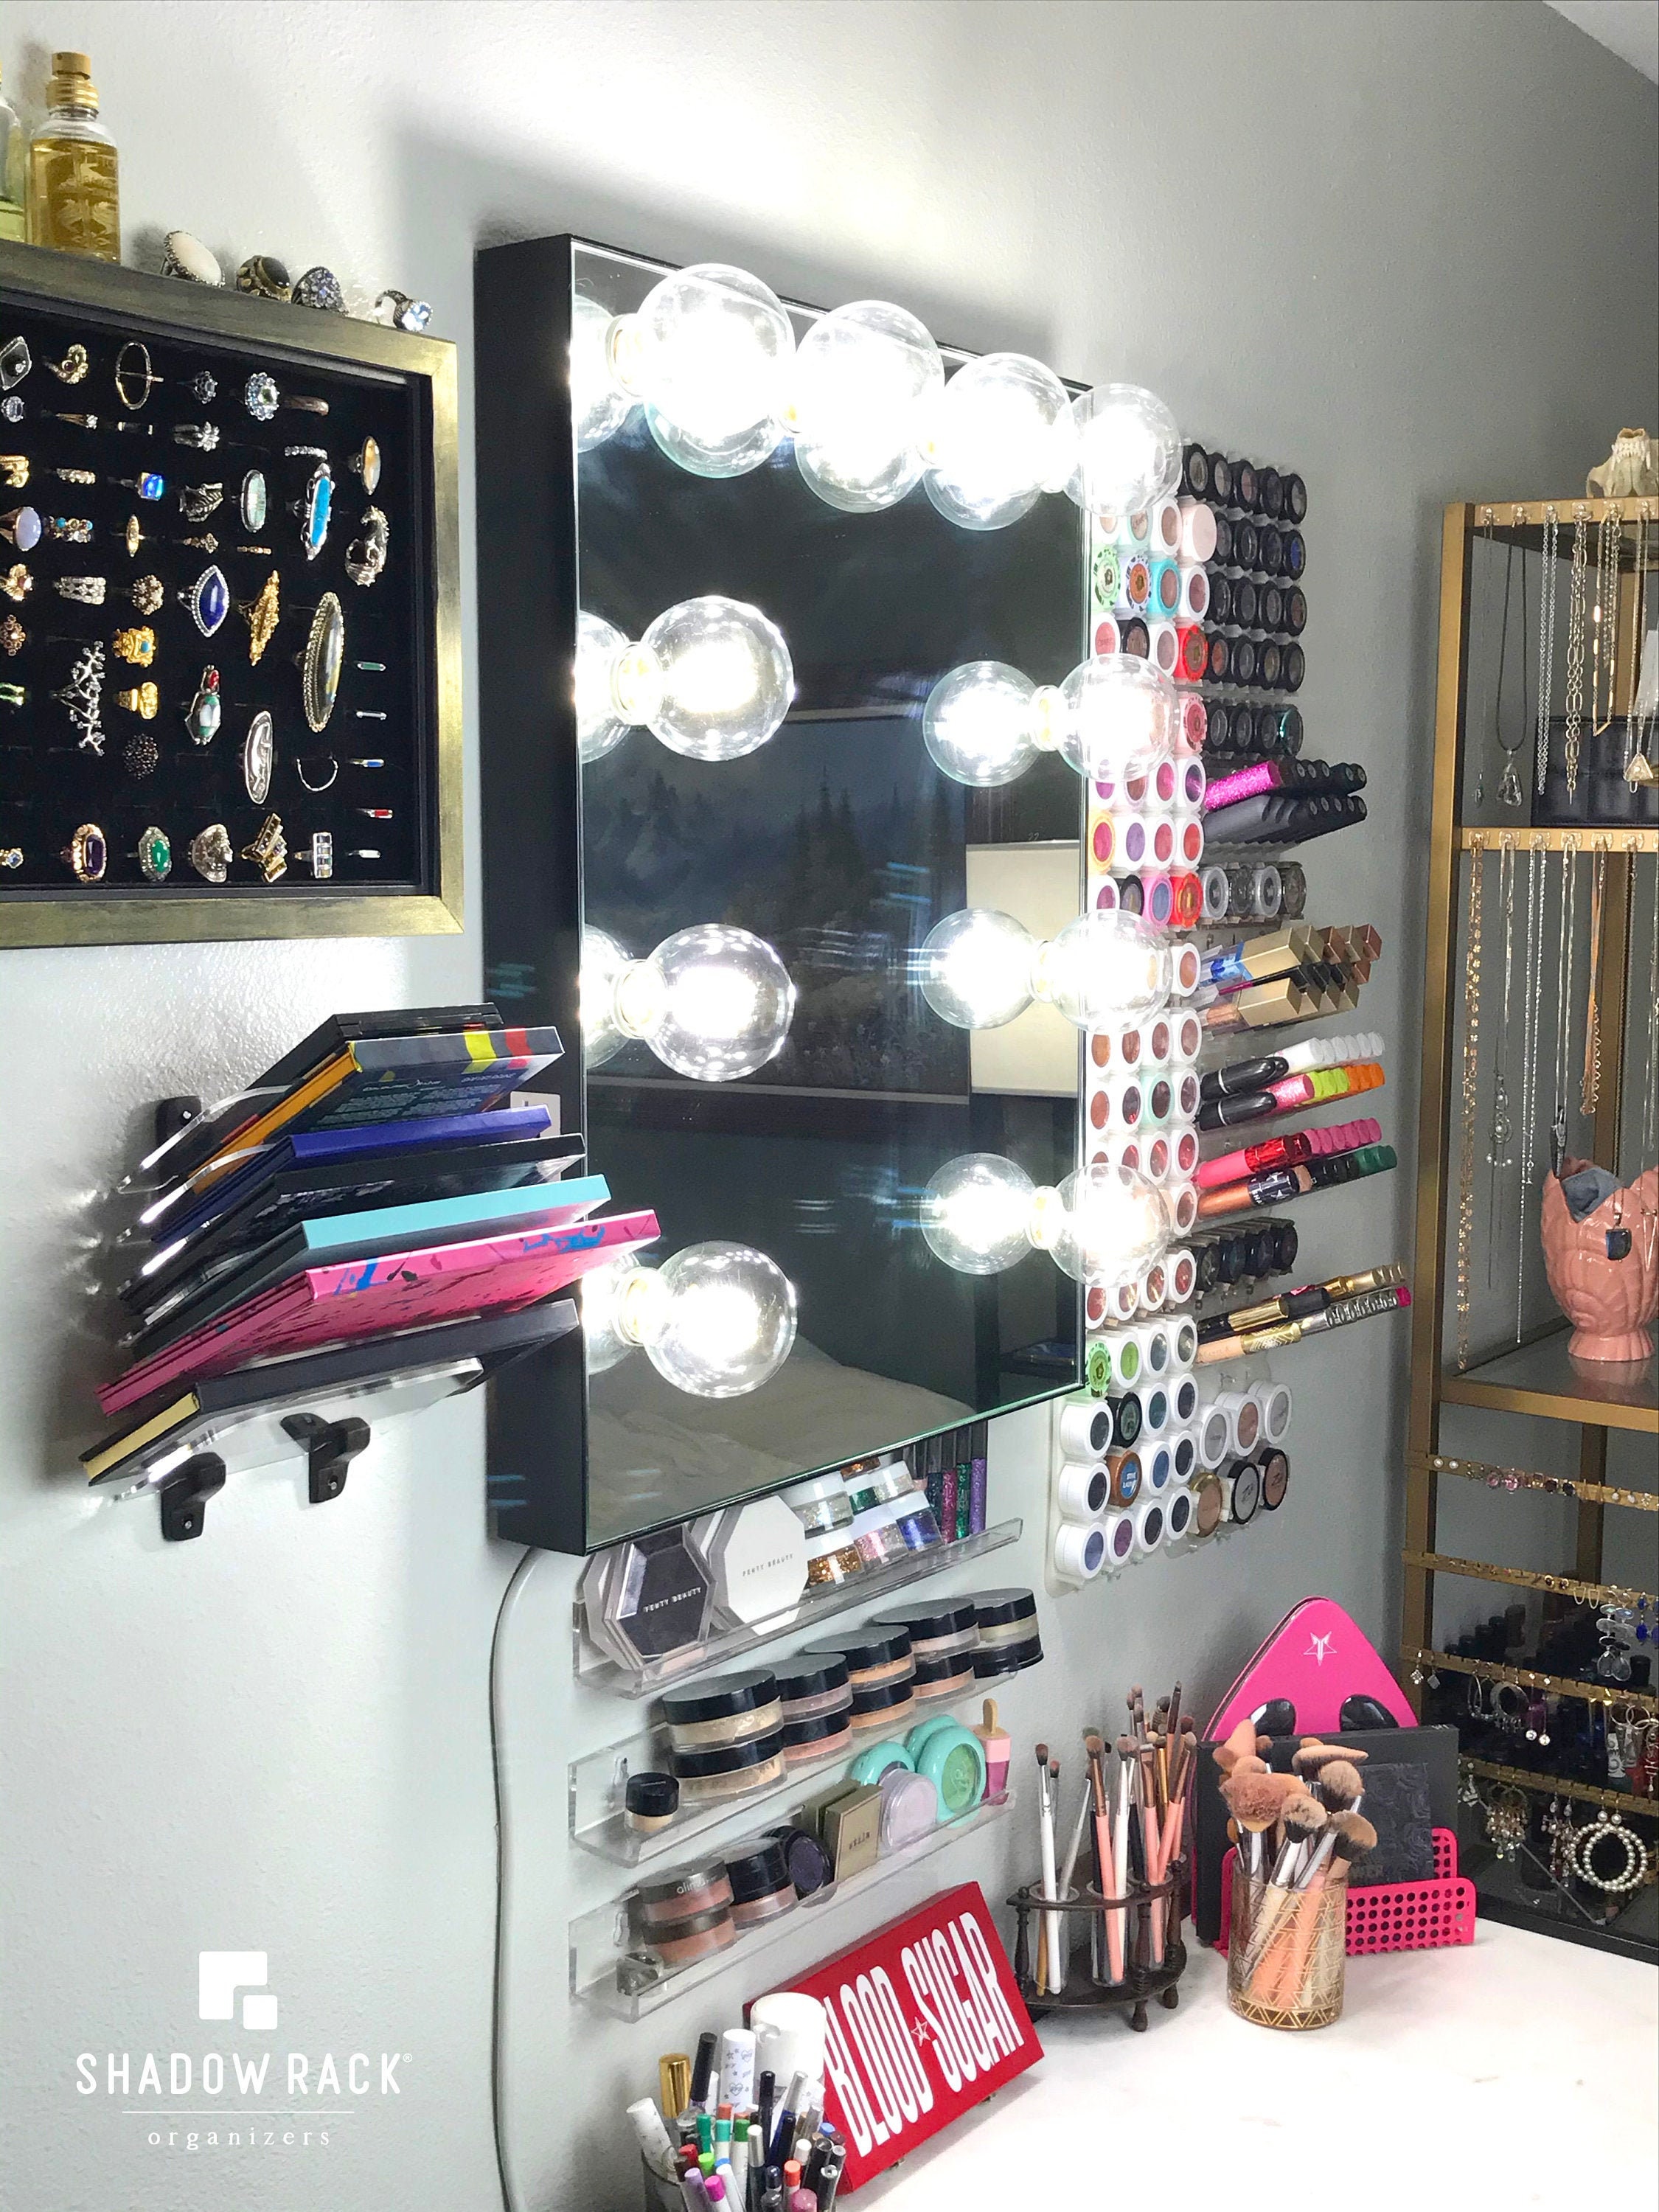 Makeup Storage Ideas: Using a Deluxe Bead Organizer for Eyeshadow